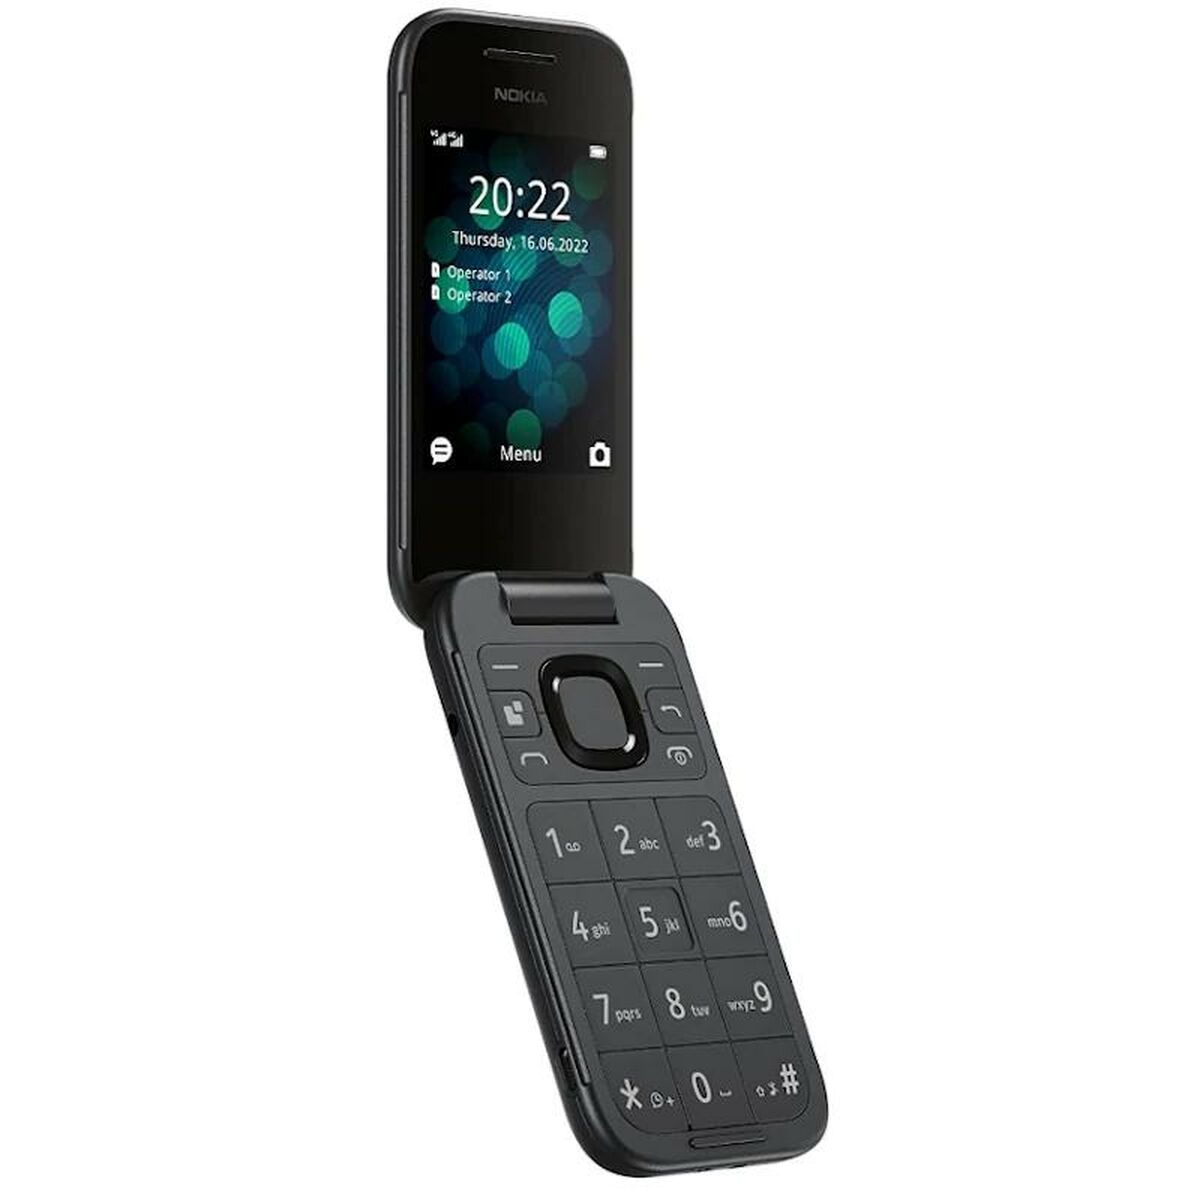 Mobile telephone for older adults Nokia 2660 2,8" Black 32 GB, Nokia, Electronics, Mobile phones, mobile-telephone-for-older-adults-nokia-2660-2-8-black-32-gb, Brand_Nokia, category-reference-2609, category-reference-2617, category-reference-2618, category-reference-t-19653, category-reference-t-19894, Condition_NEW, office, Price_50 - 100, telephones & tablets, Teleworking, wifi y bluetooth, RiotNook